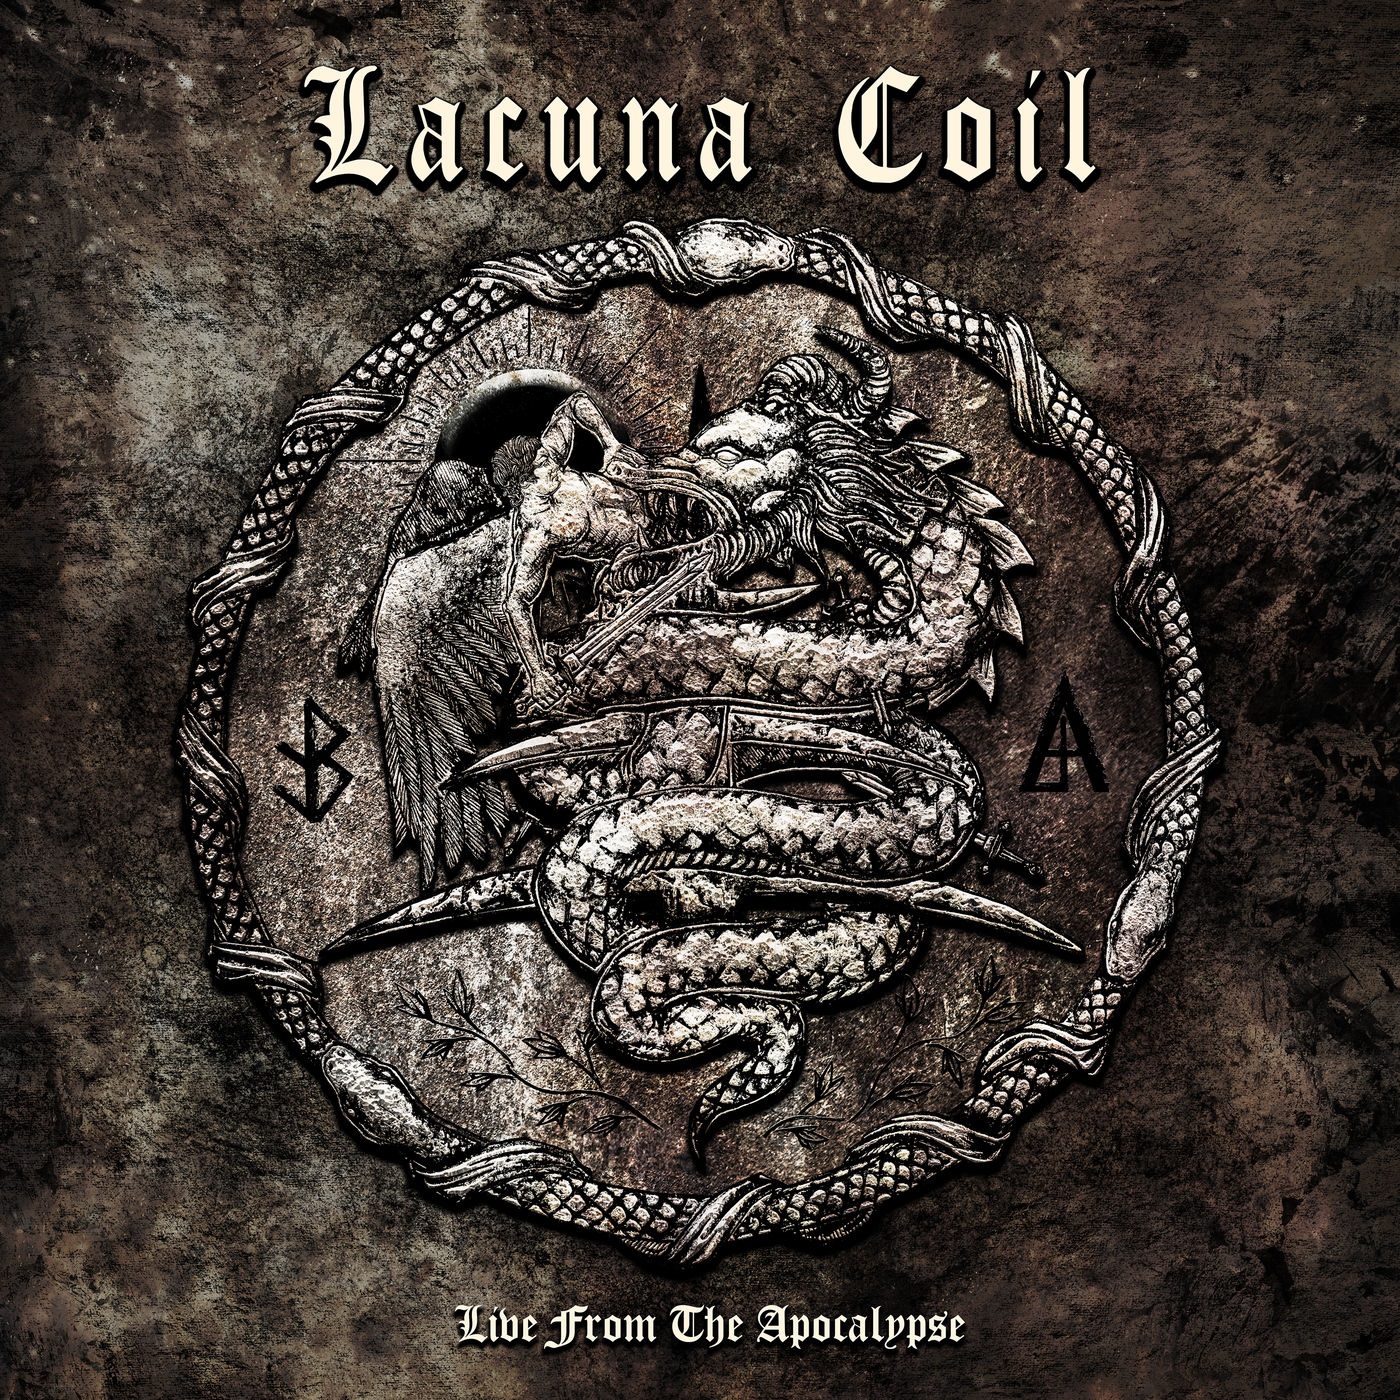 Lacuna Coil – Live From The Apocalypse (2021) [FLAC 24bit/44,1kHz]